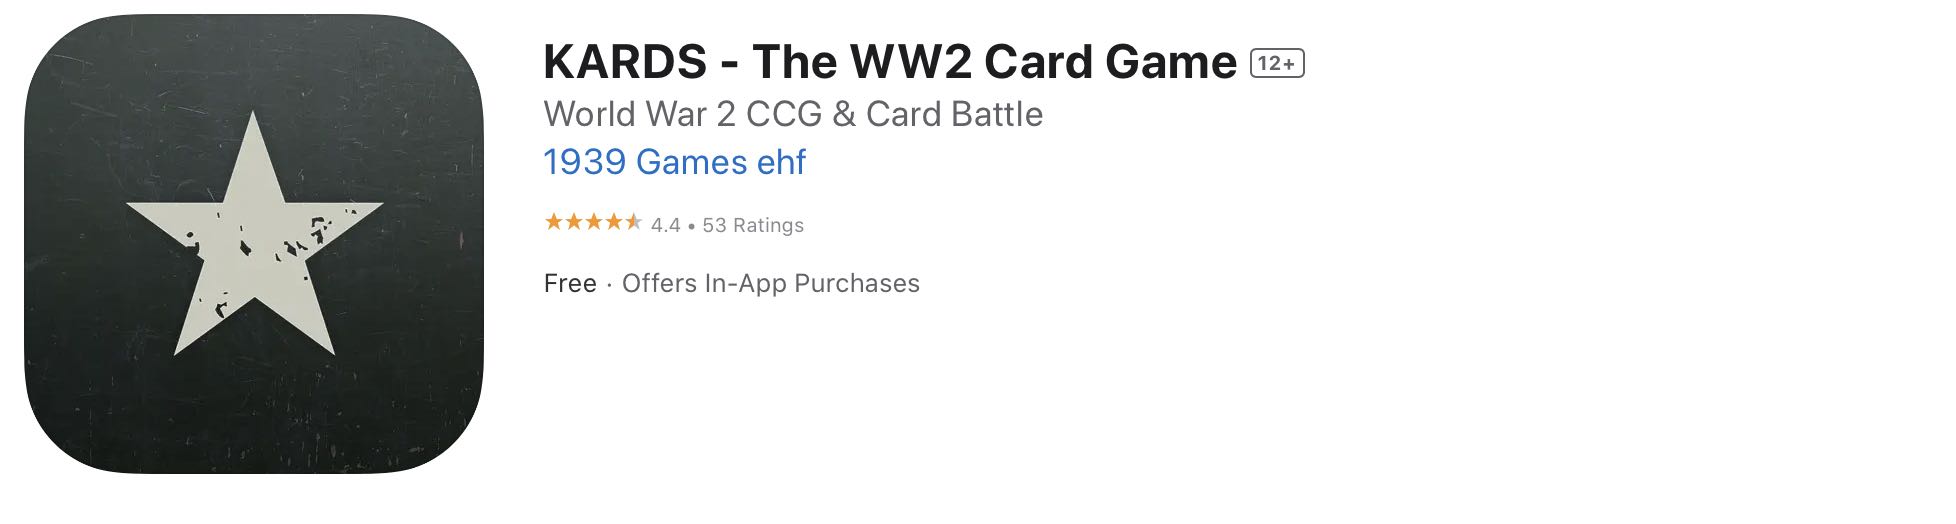 KARDS cheat codes The WW2